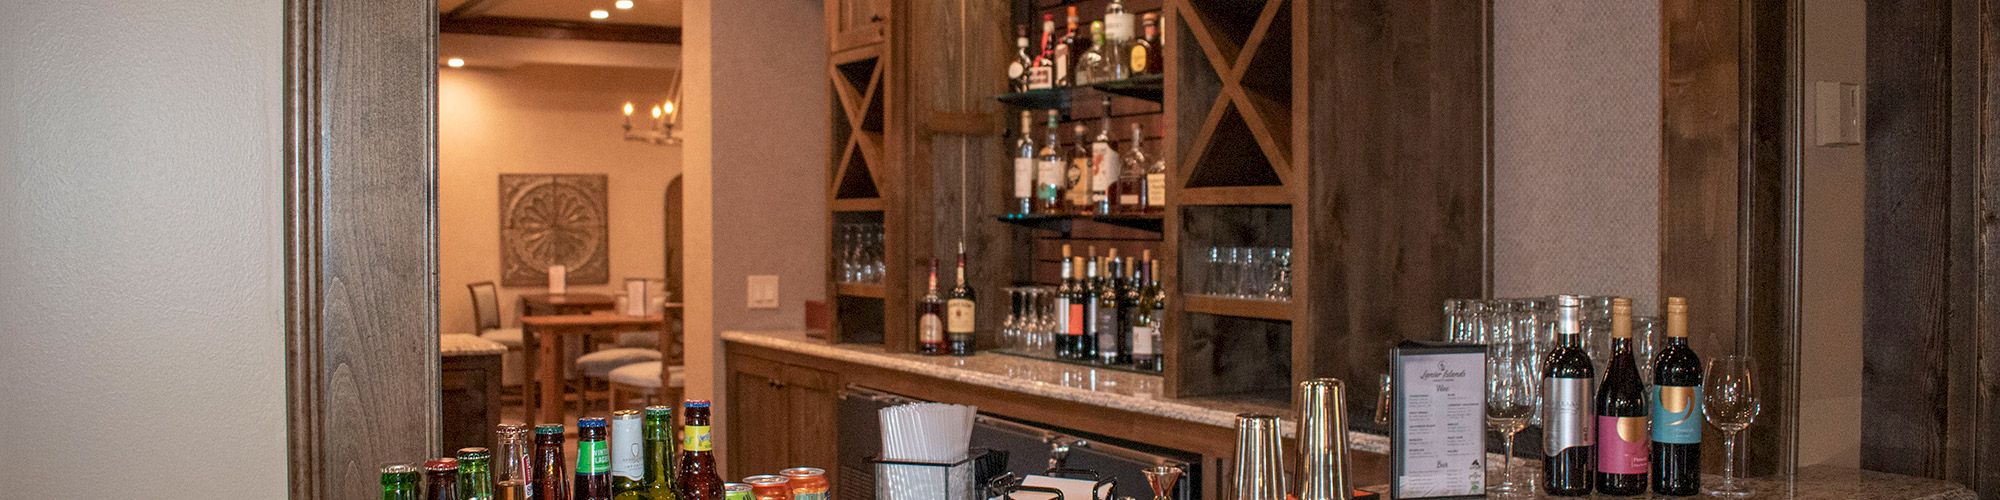 This image shows a home bar with bottles of beer, wine, and liquor on a granite countertop, wooden cabinets, and a view into another room.